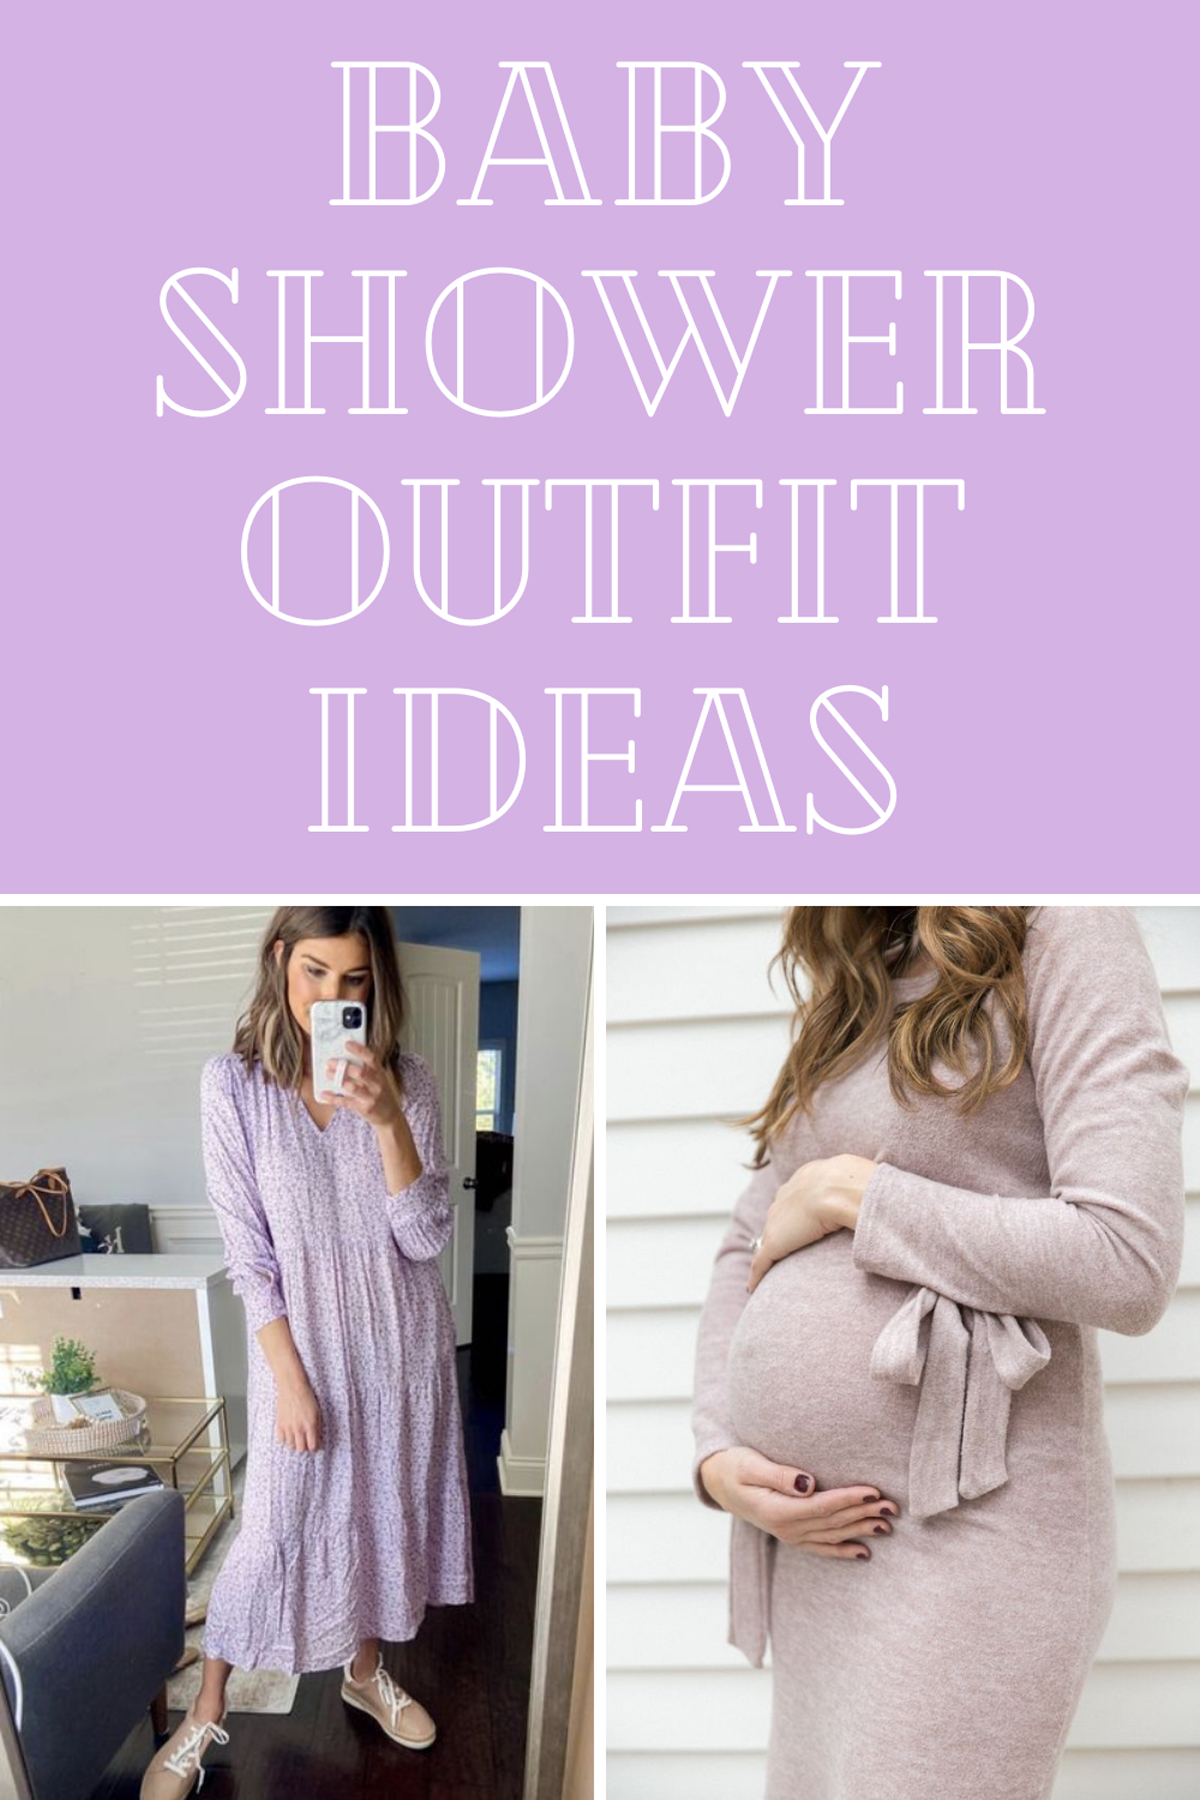 Maternity Style Showers